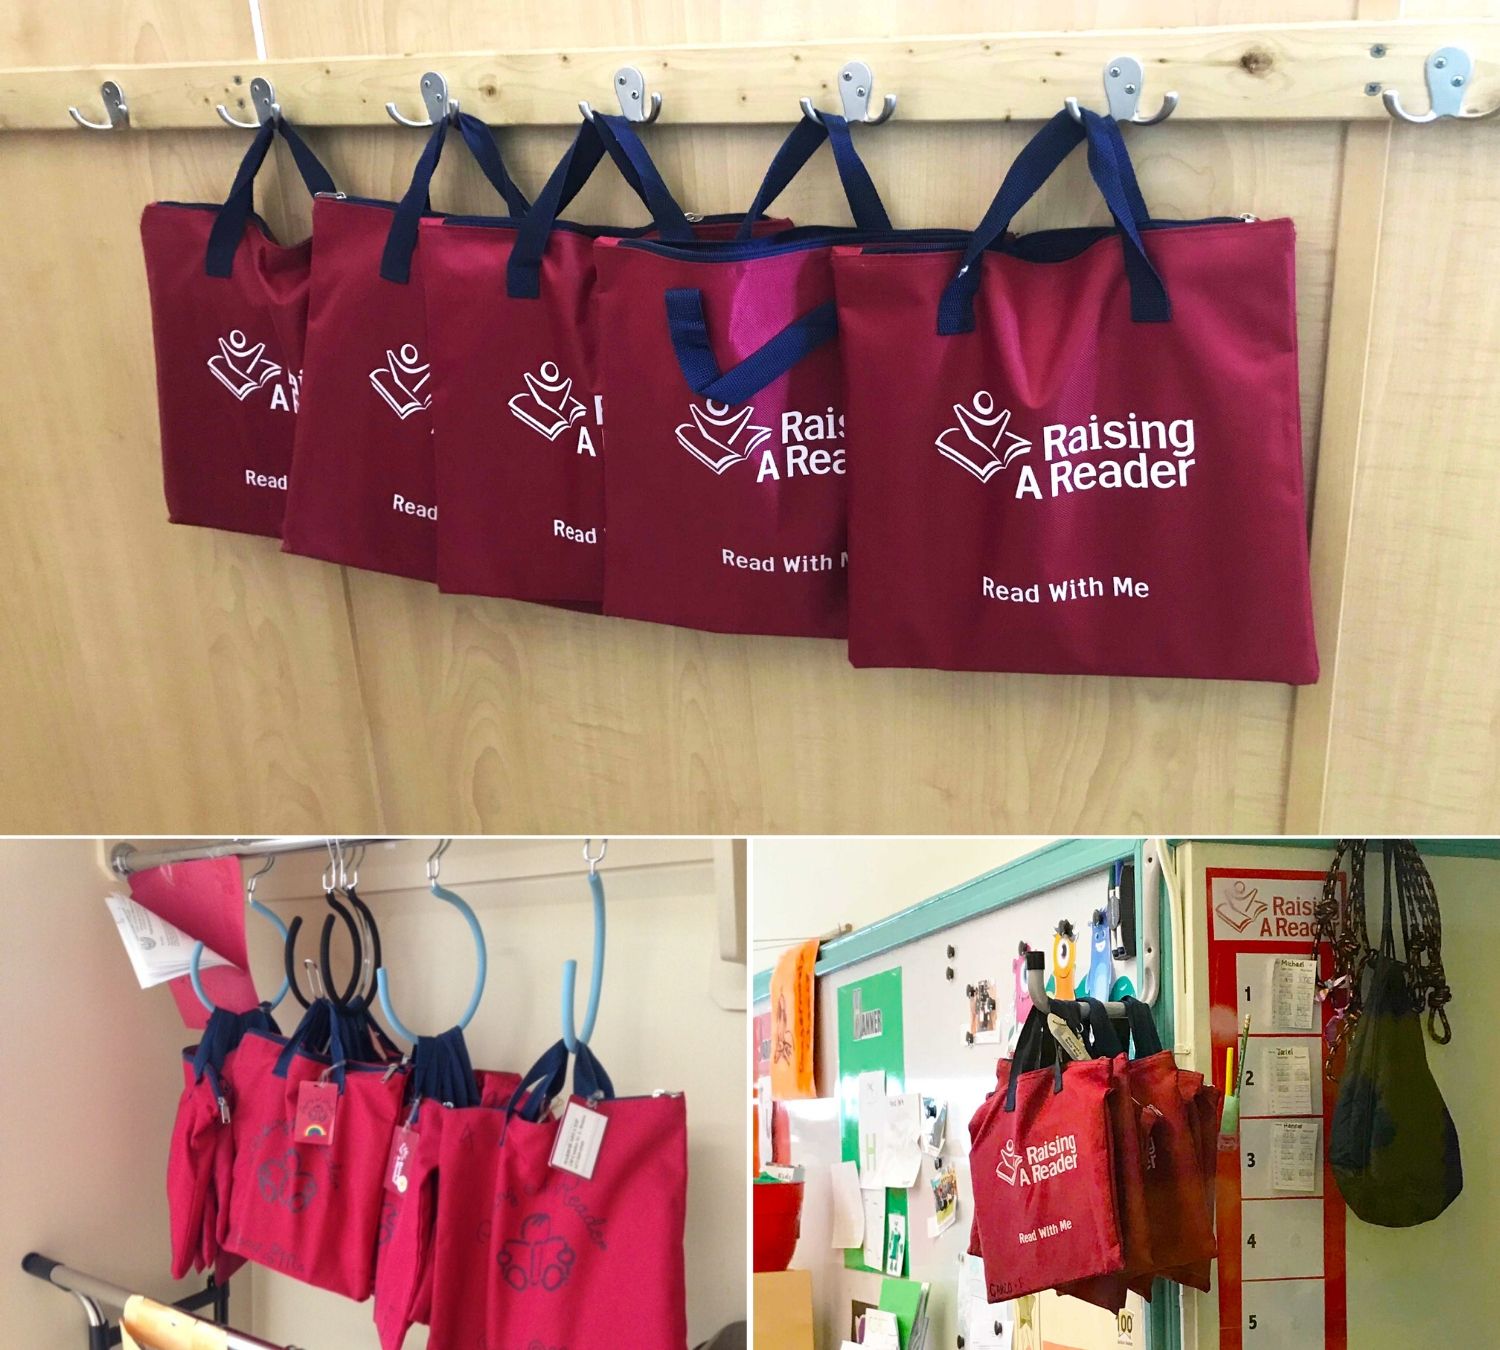 examples of red bags hanging on hooks in classroom